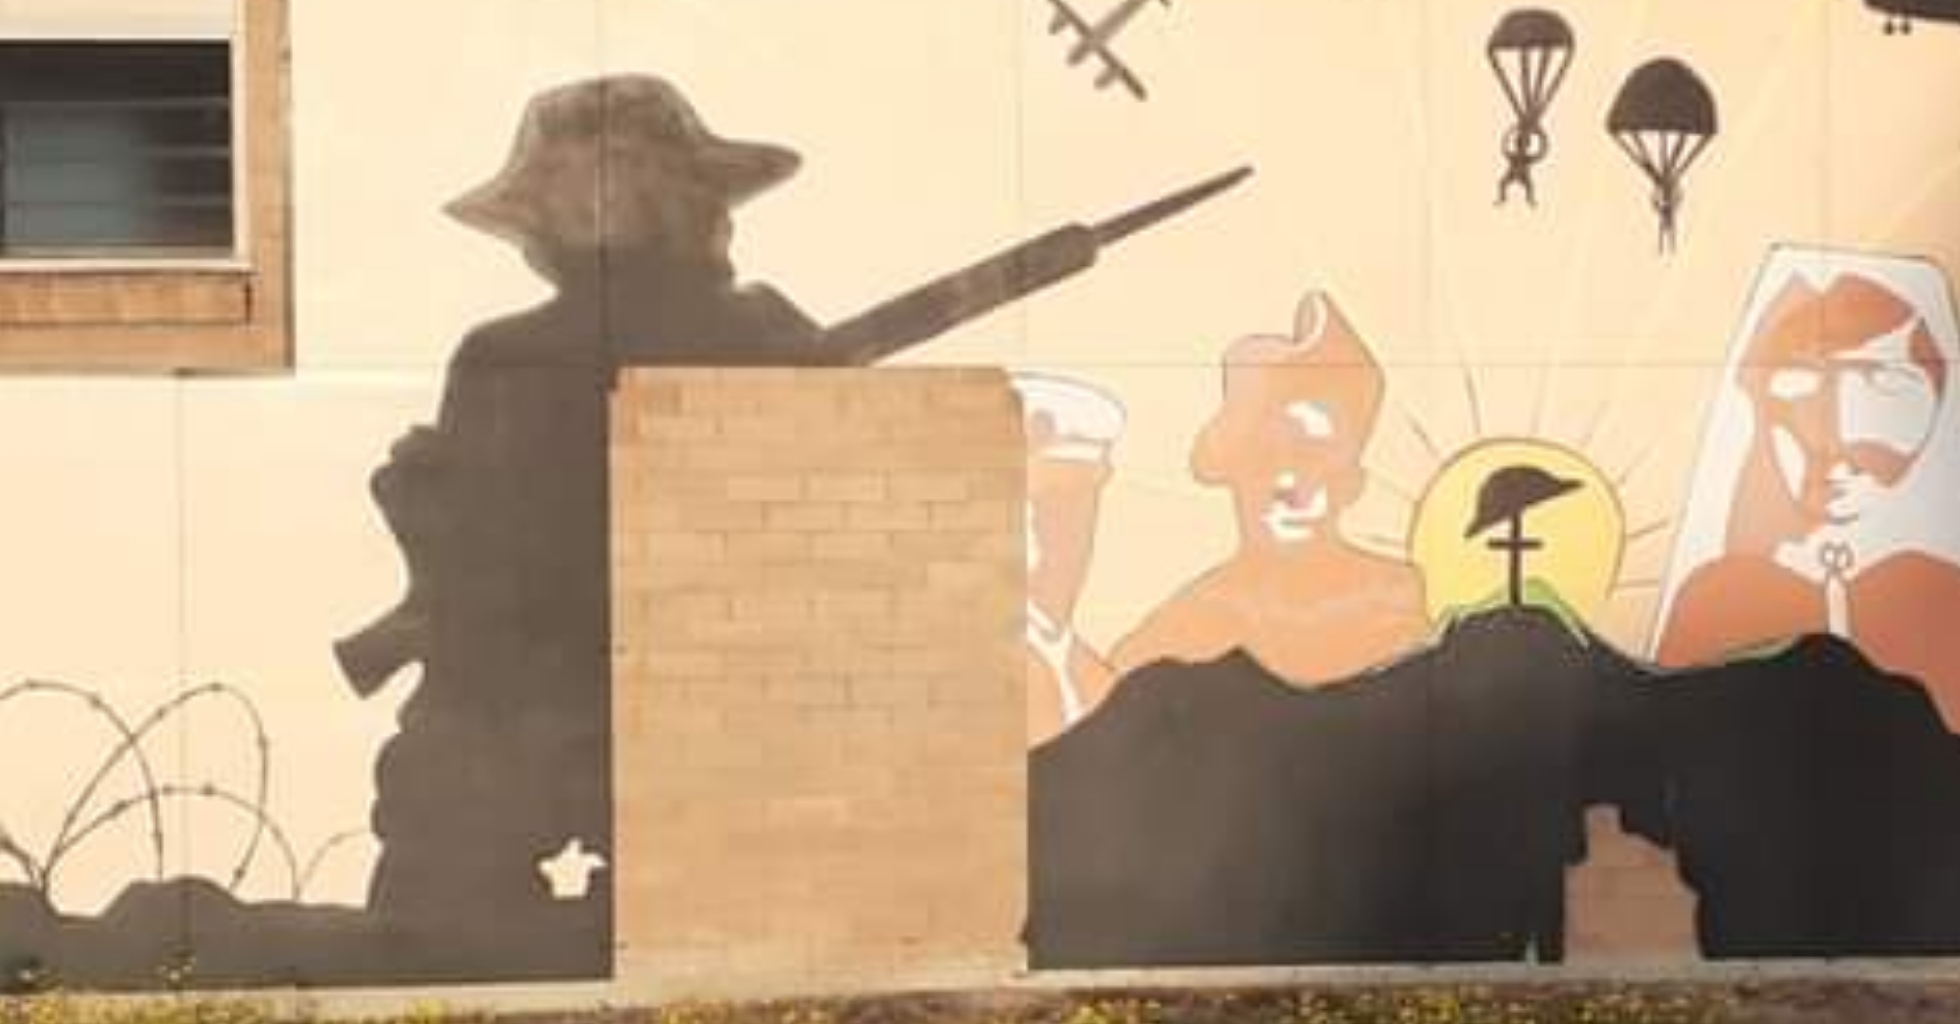 You are currently viewing Disgraceful act, ANZAC mural vandalized